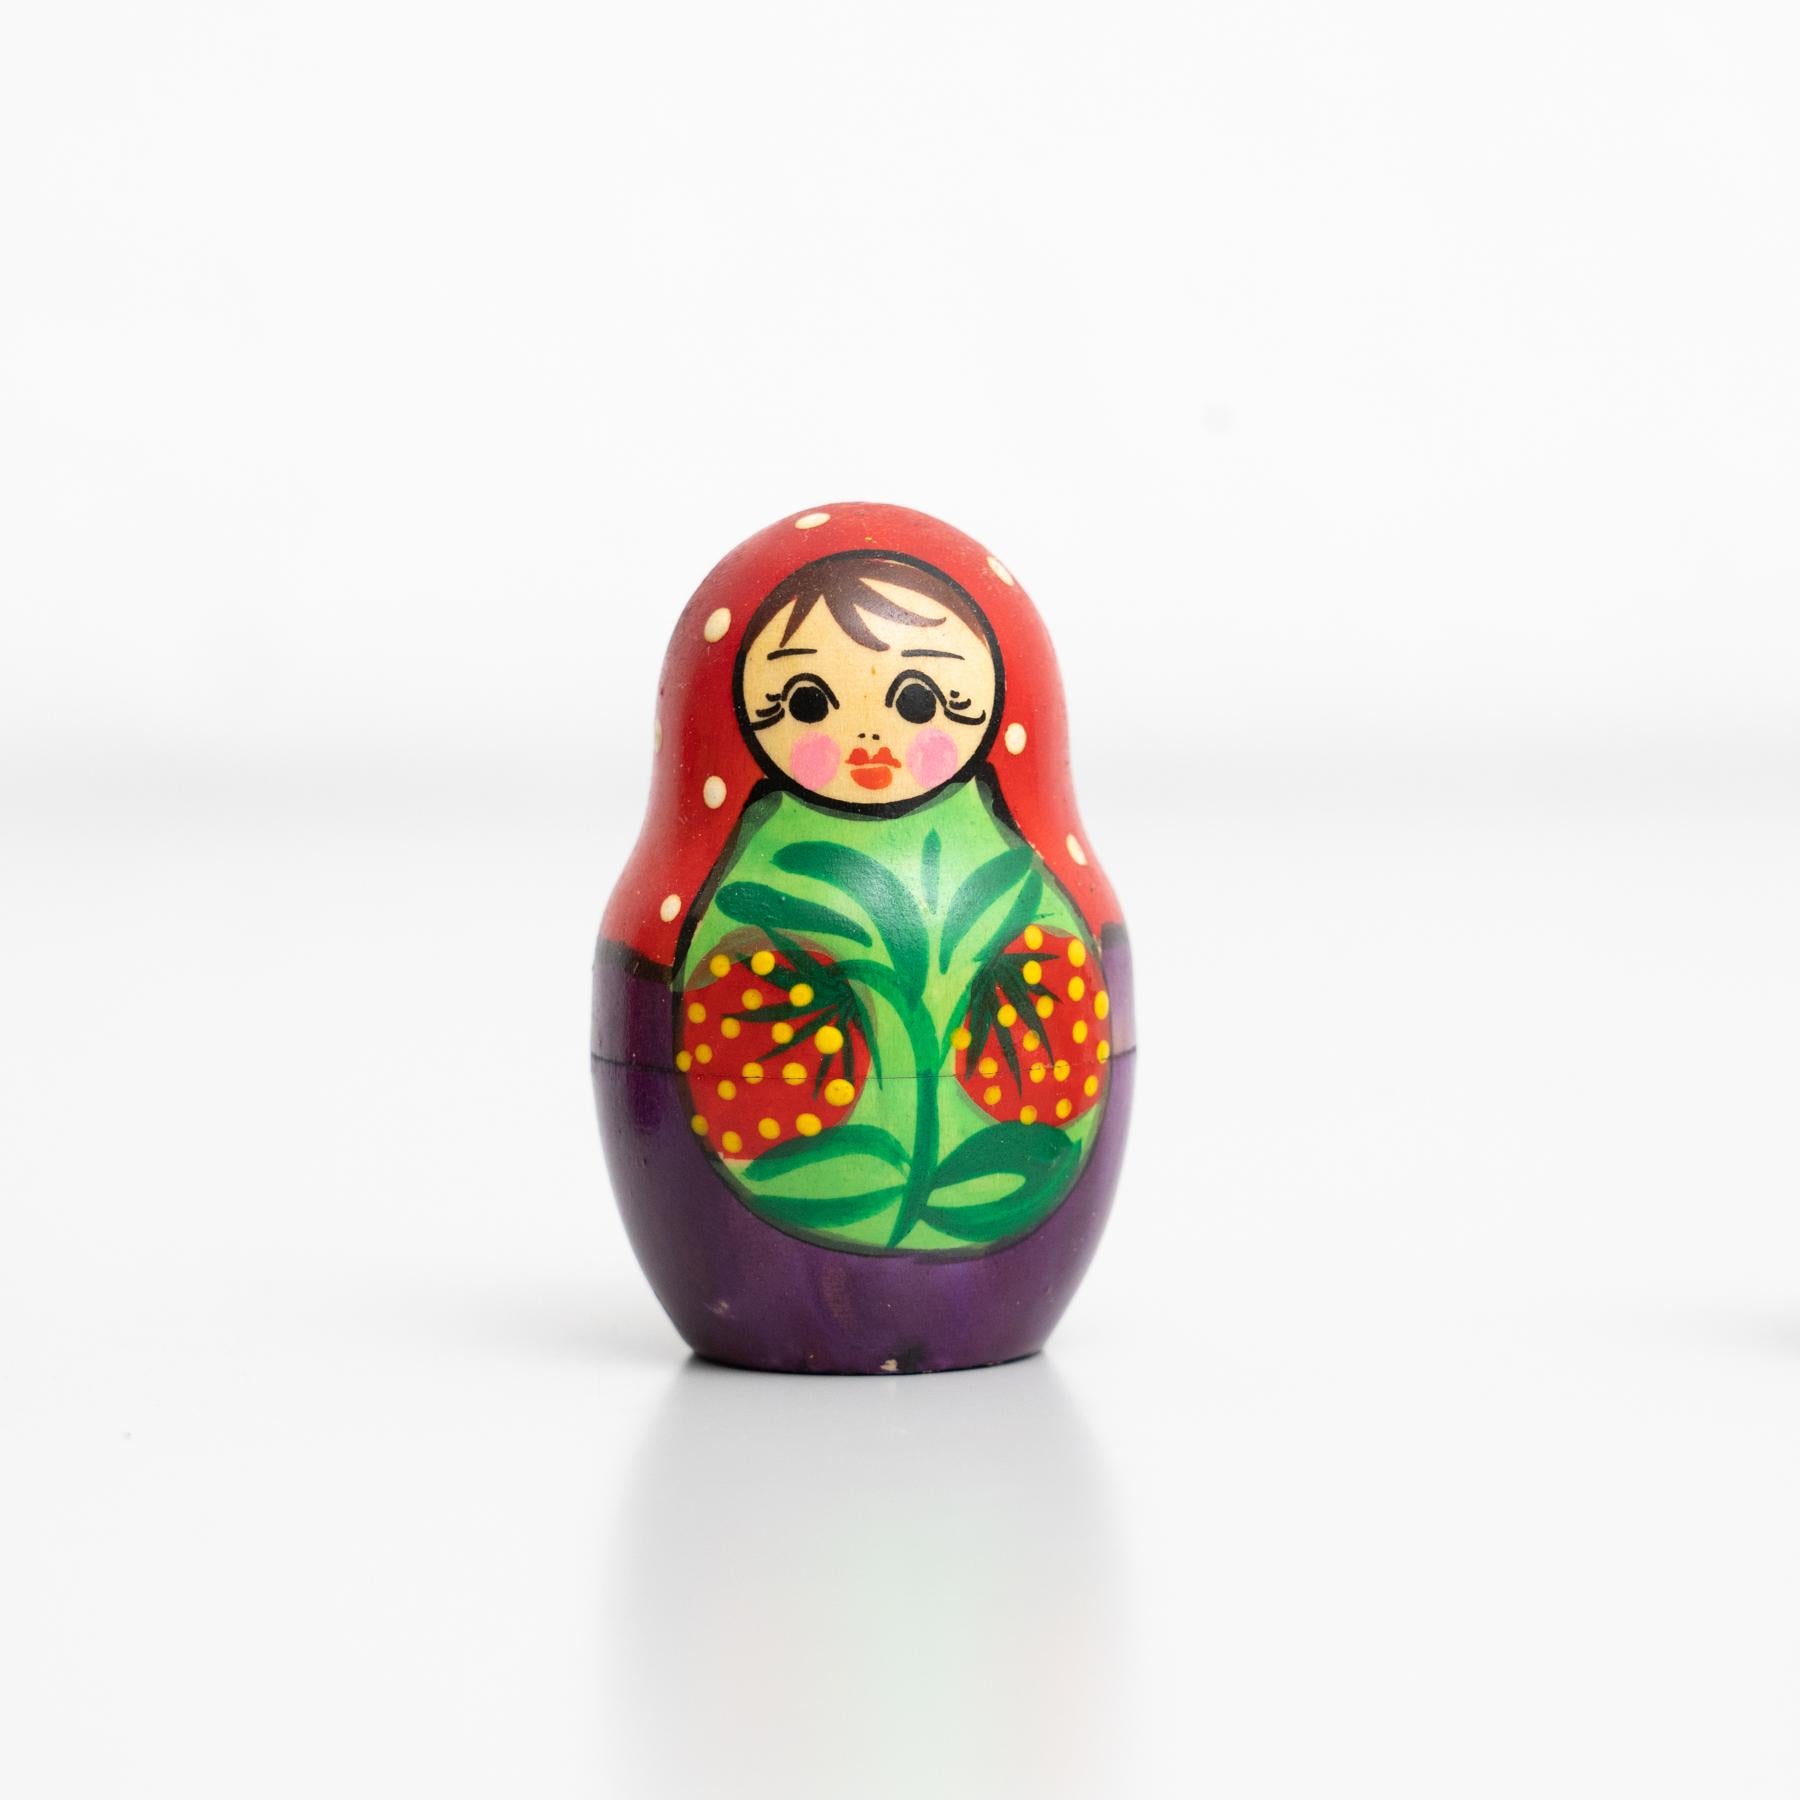 Antique Traditional Hand-Painted Wooden Russian Doll, circa 1960 For Sale 12